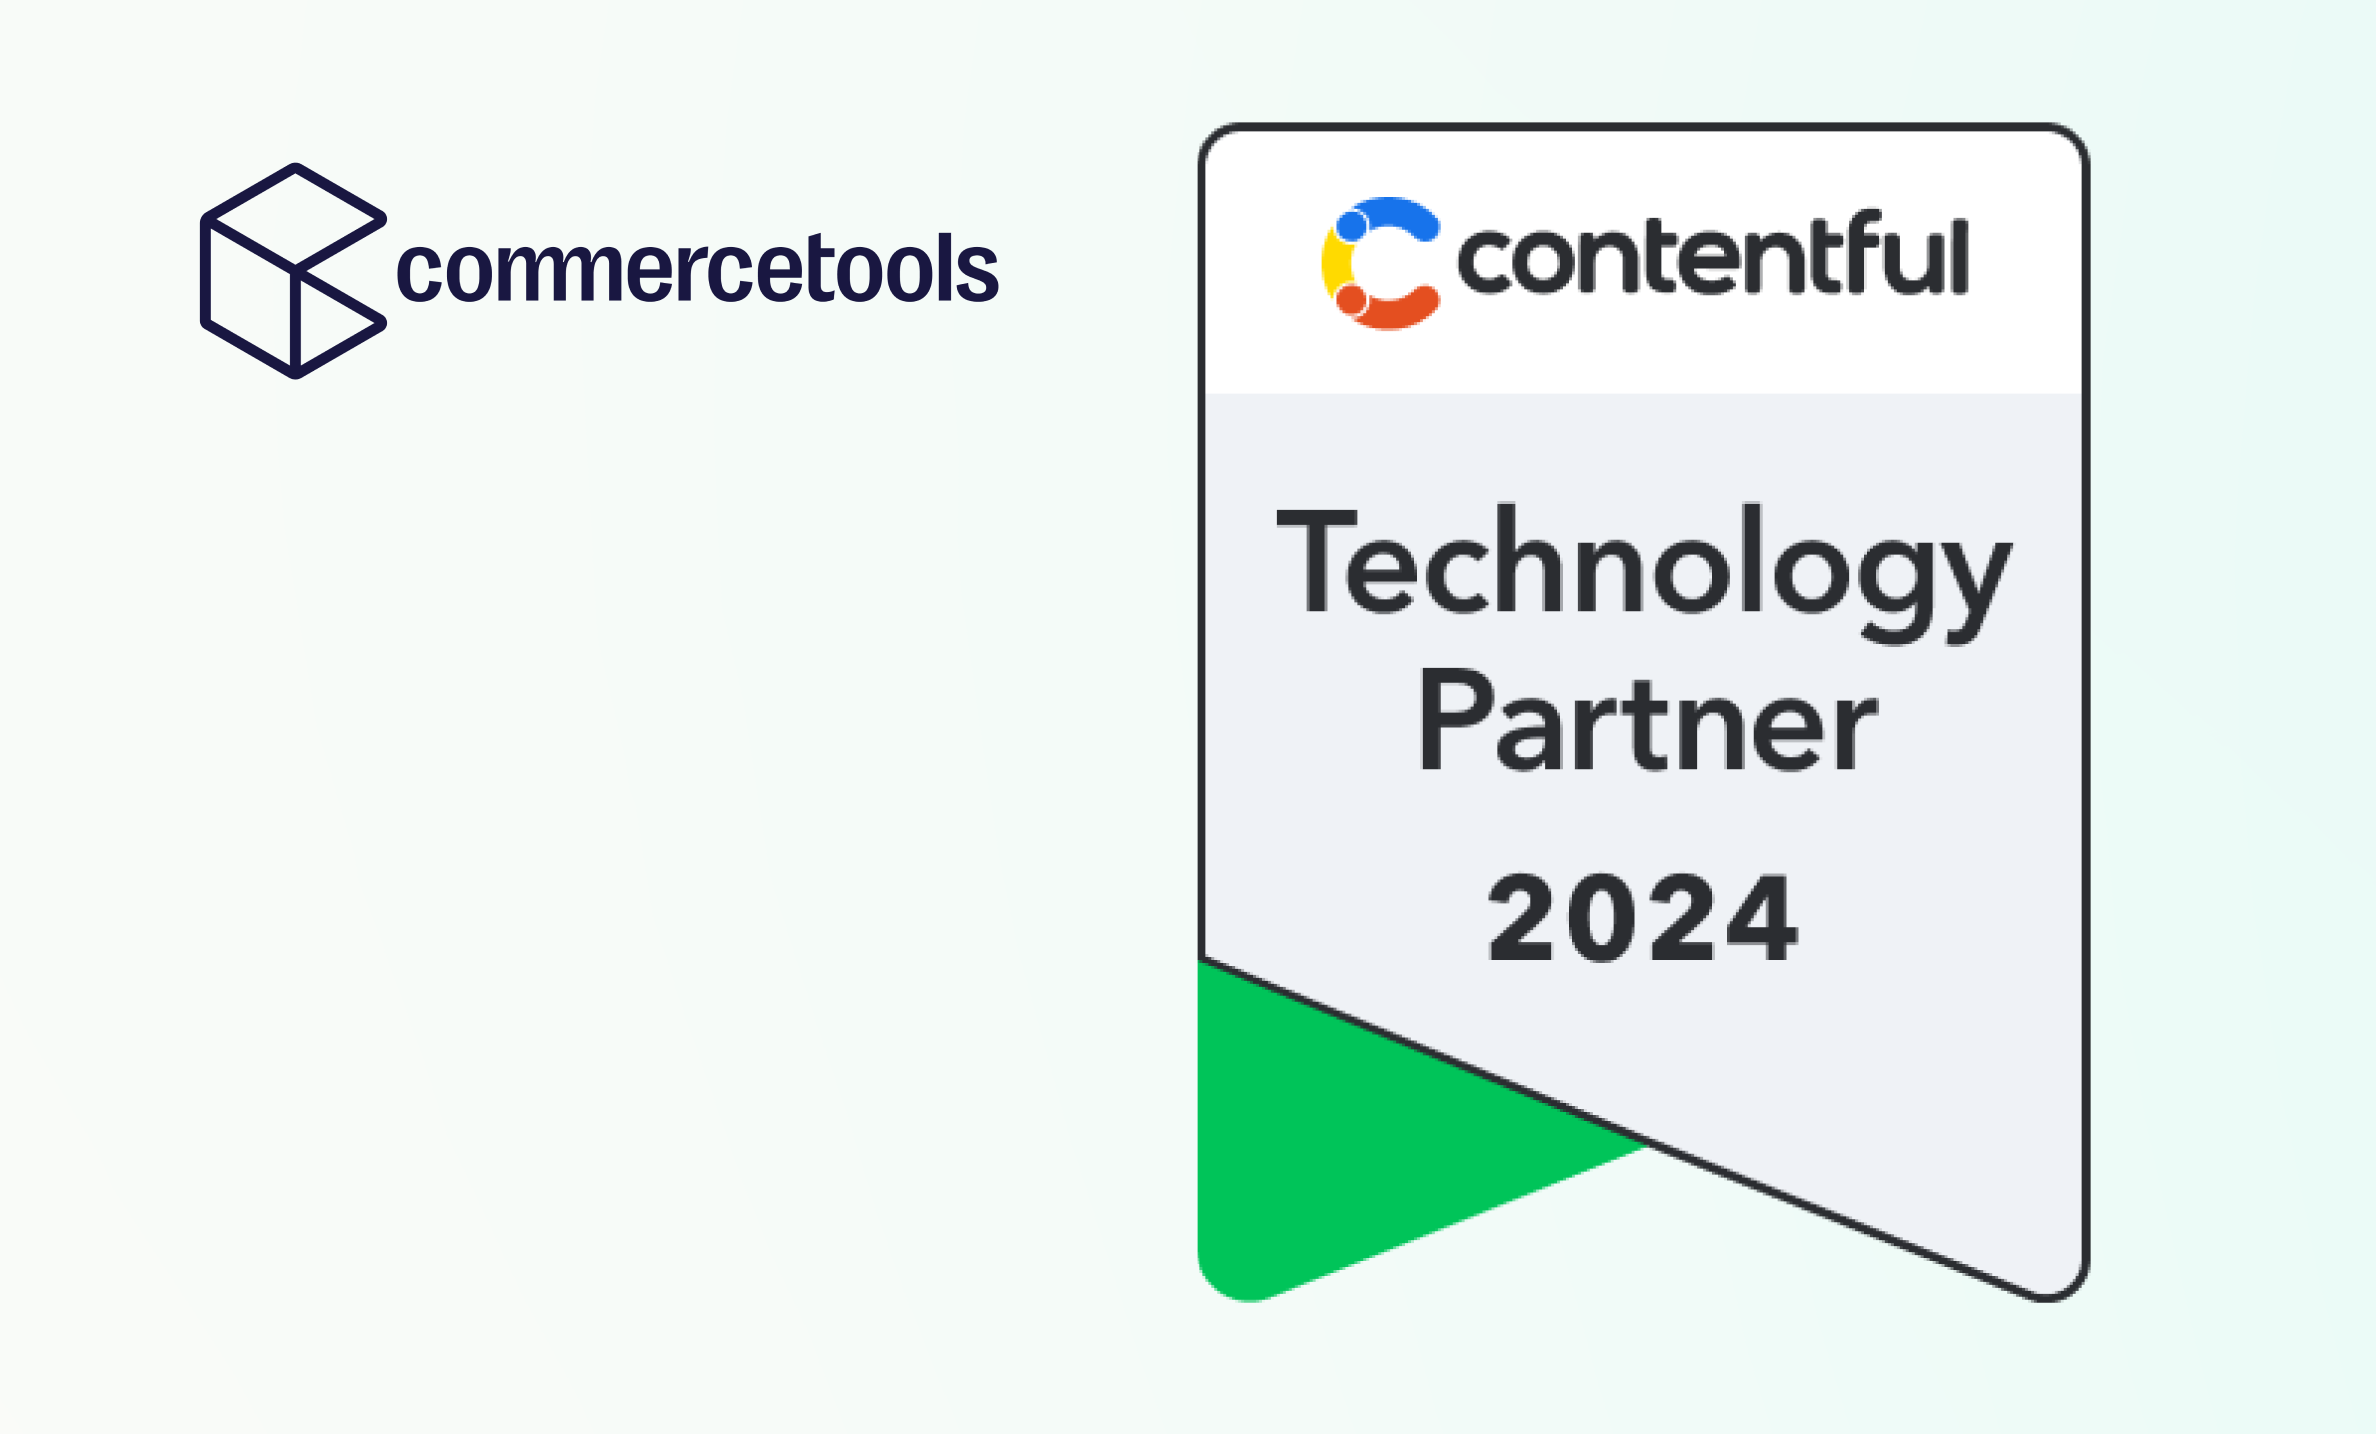 commercetools Named Technology Partner of the Year by Contentful® for the Second Year in a Row